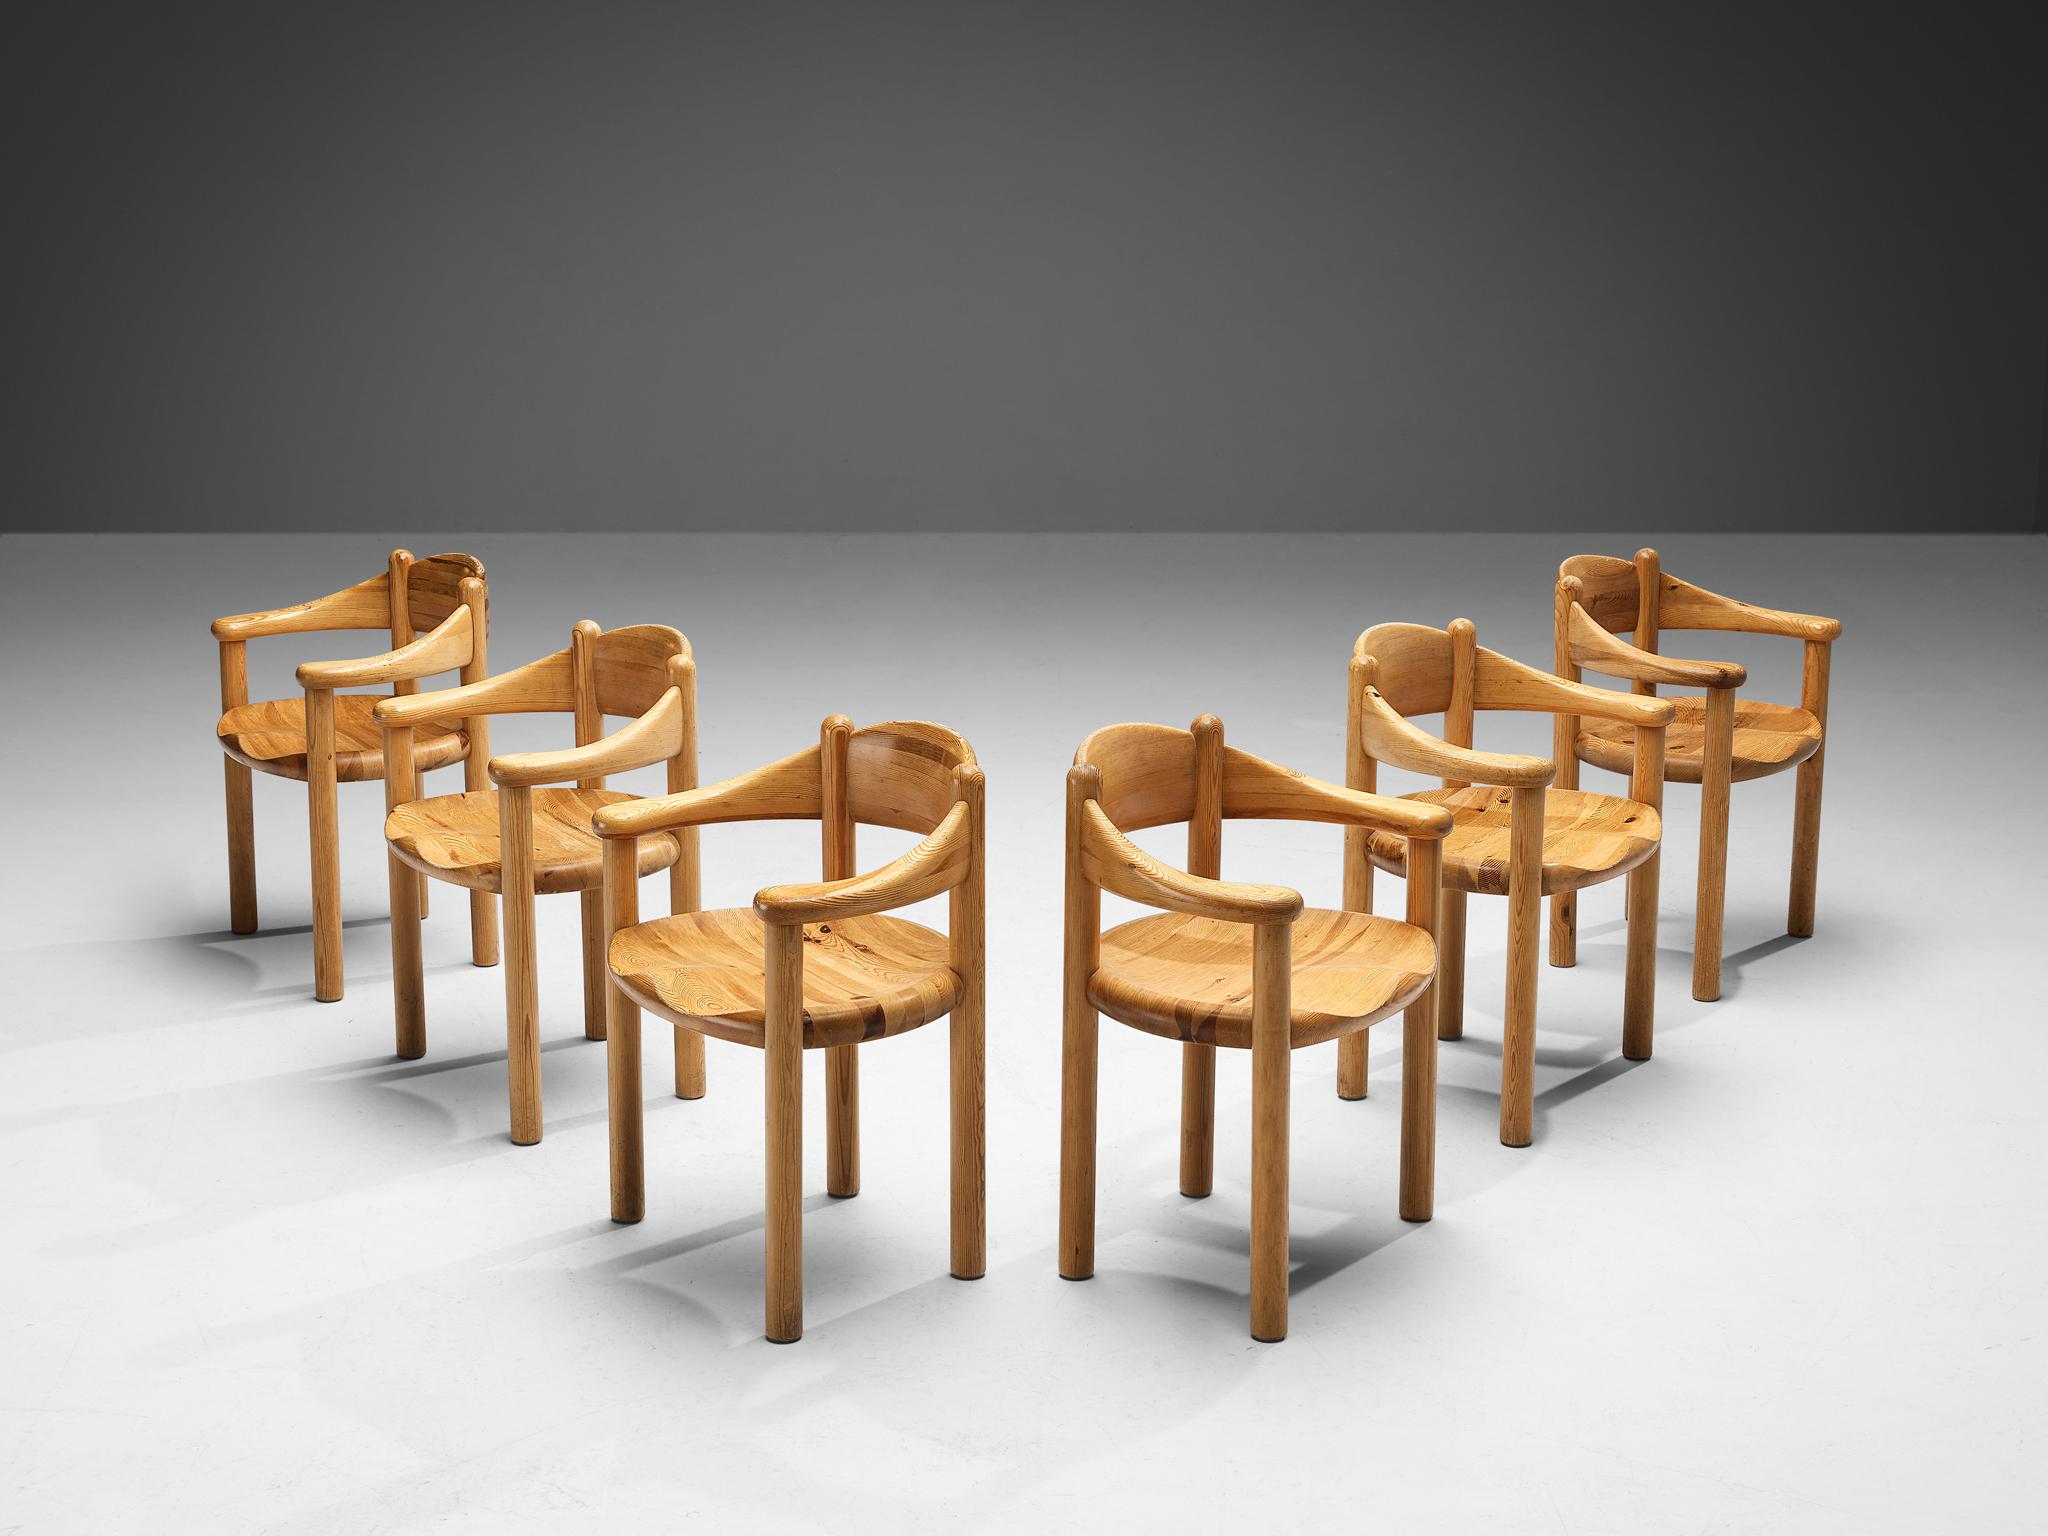 Rainer Daumiller for Hirtshals Savvaerk, set of six armchairs, pine, Denmark, 1970s.

Beautiful set of six organic and natural armchairs in solid pine. A simplistic design with a round seating and full attention for the natural expression and